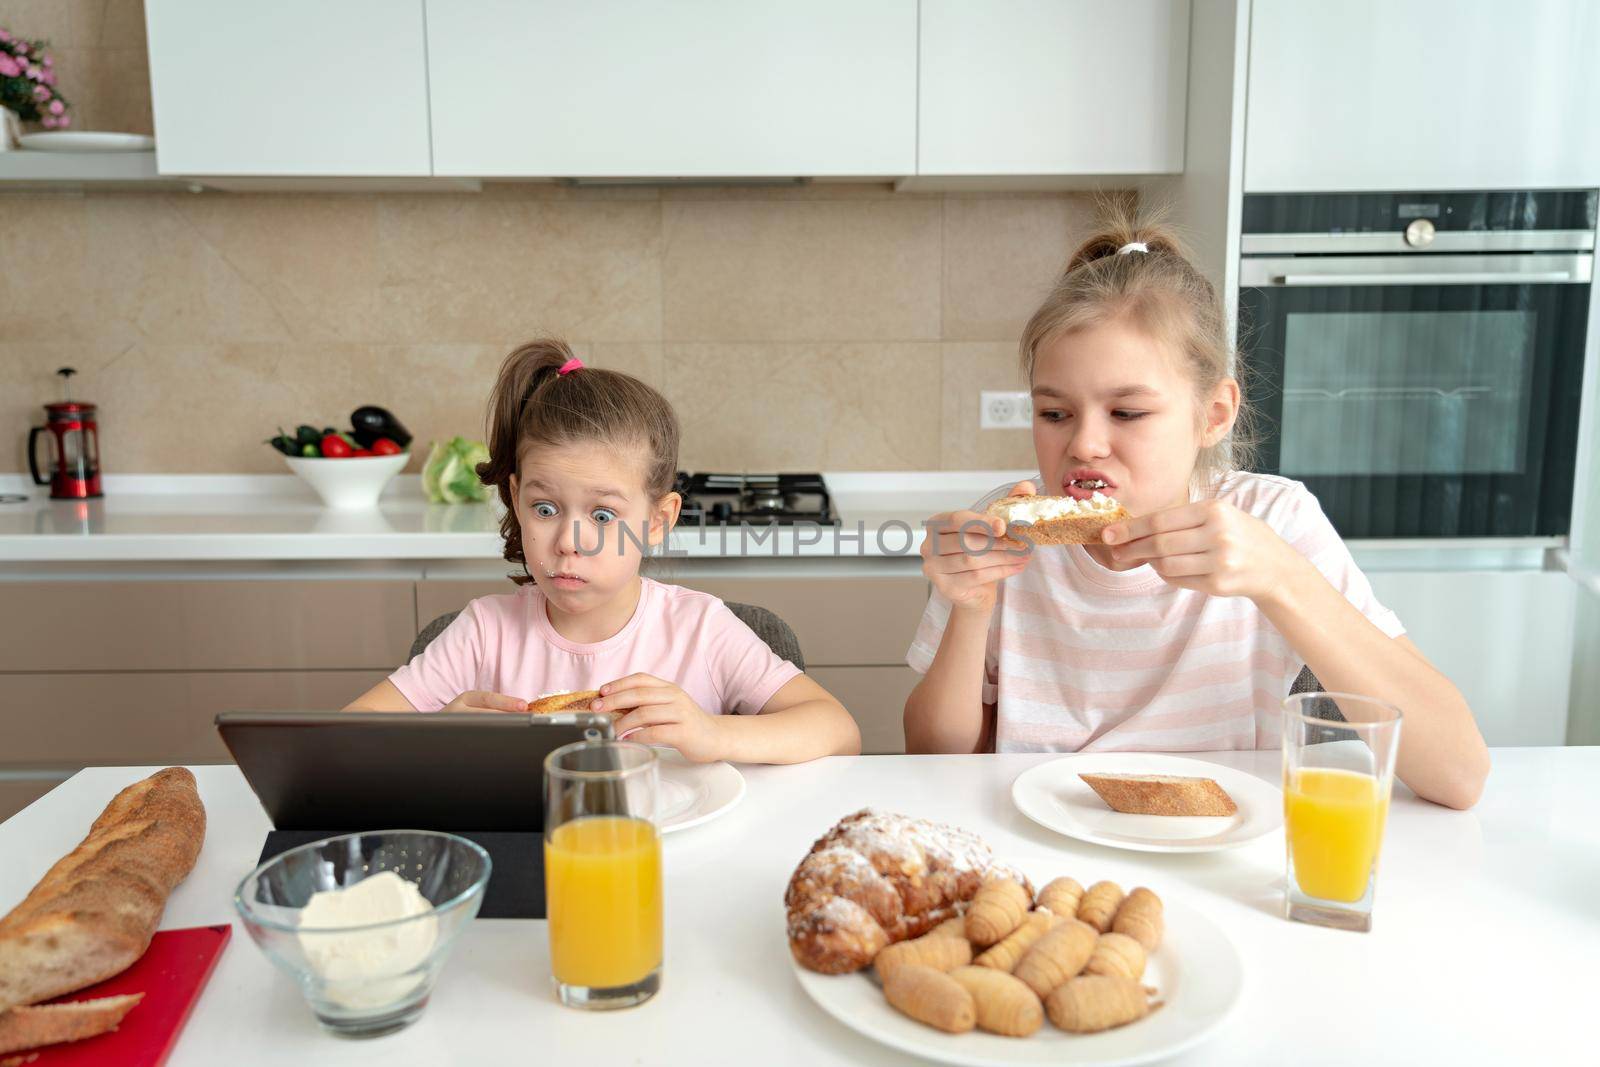 Two sisters having breakfast and watching cartoons on tablet together, happy family concept by Mariakray